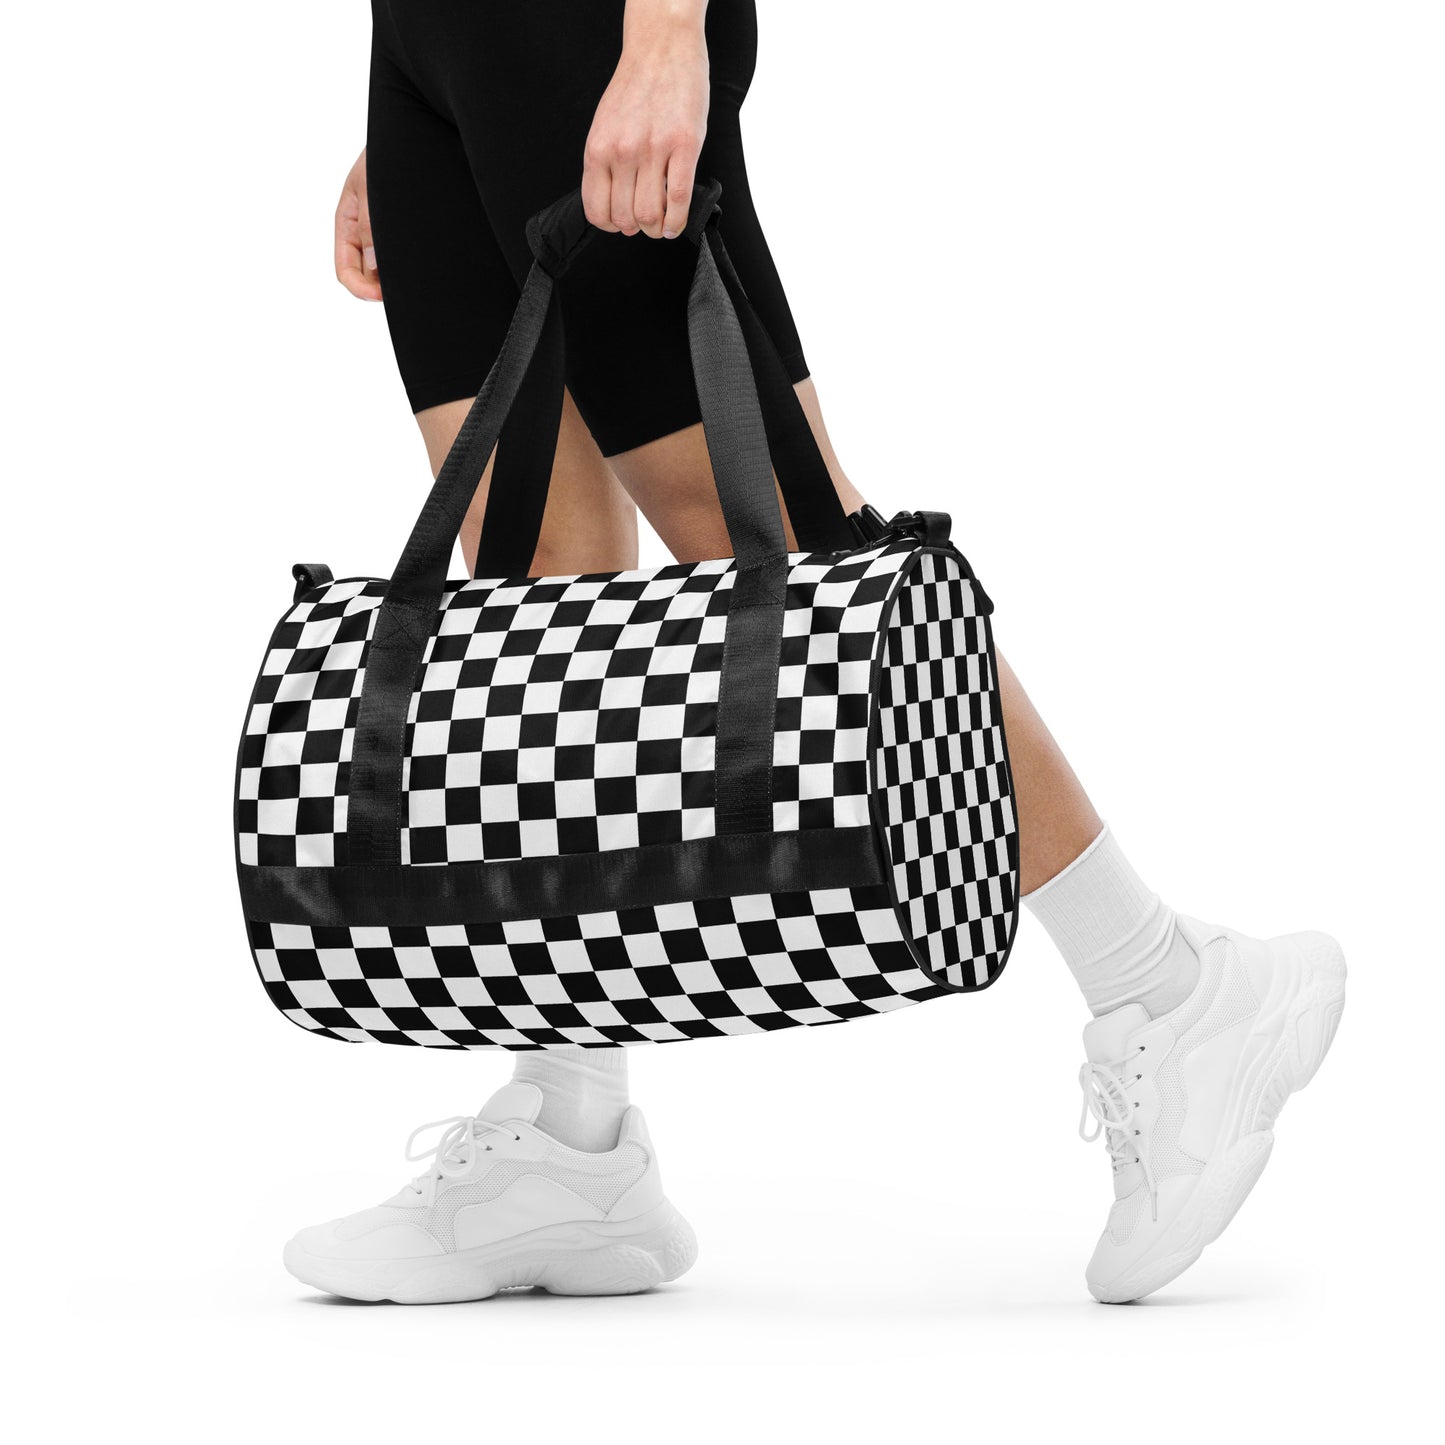 Checkmate - Inspired By Harry Styles - Sustainably Made gym bag